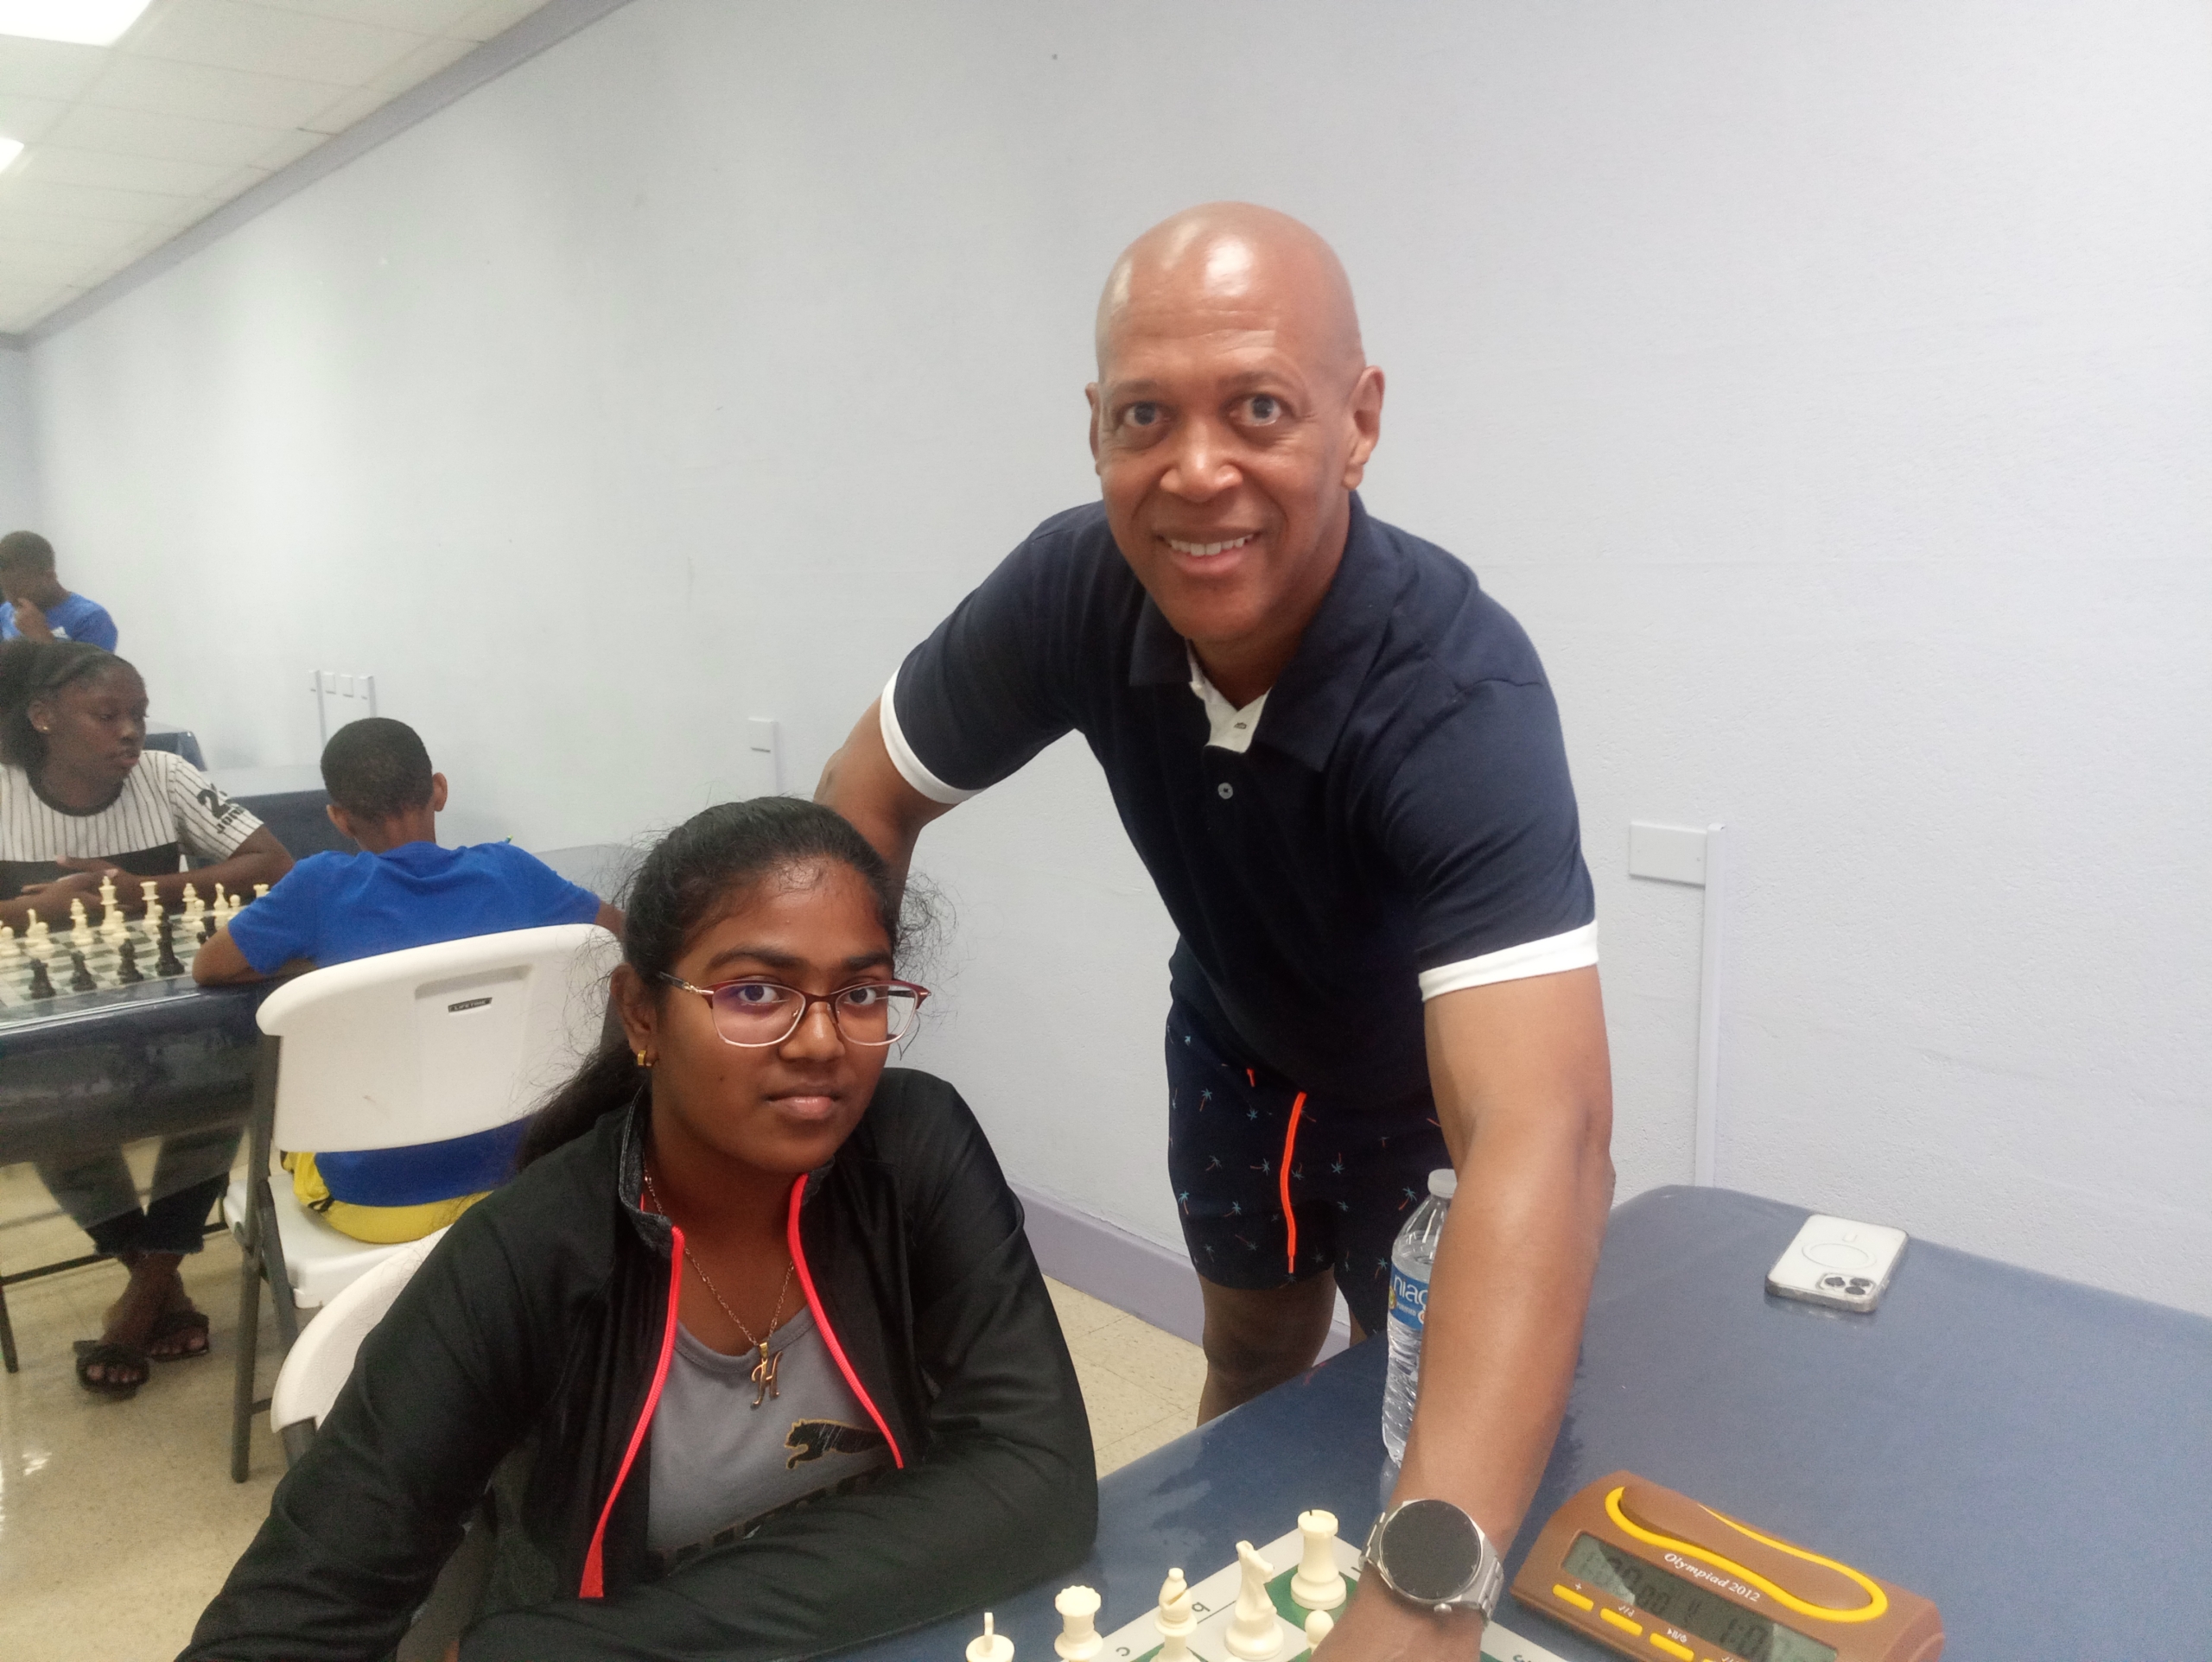 Heroes Day Chess Battle Continues - Barbados Chess Federation